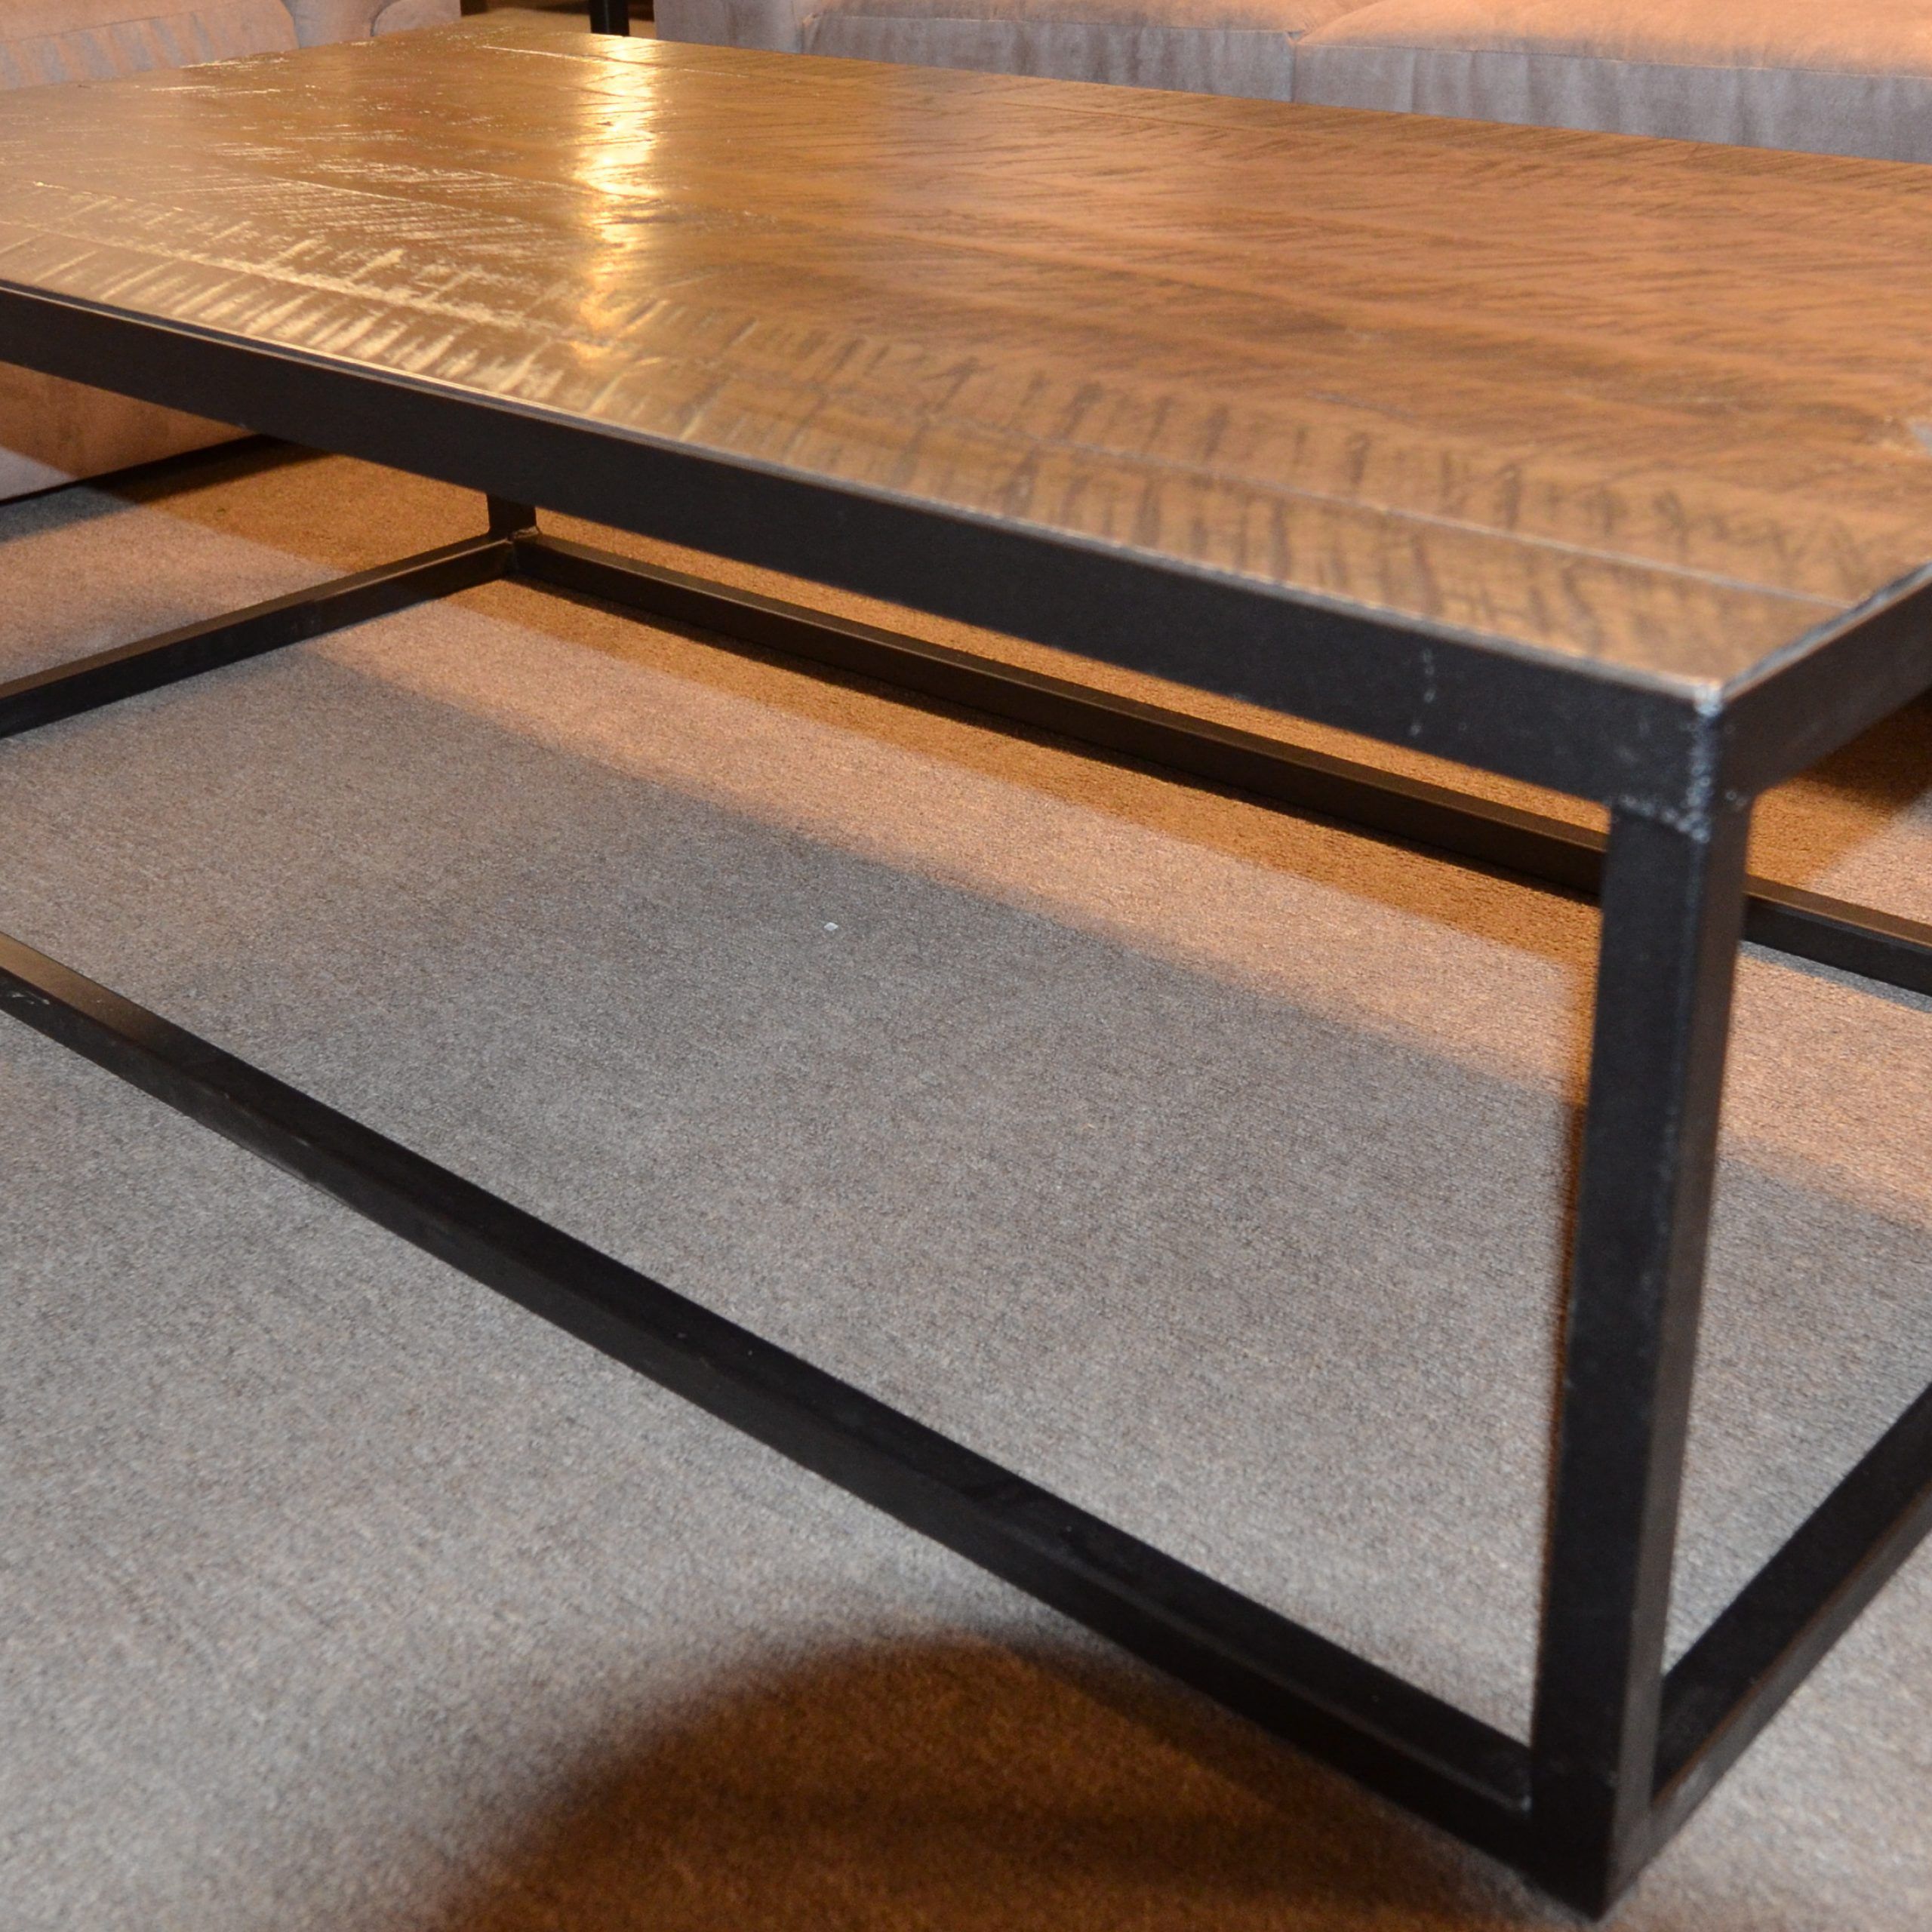 Metal Leg Coffee Table – Brices Furniture In Widely Used Iron Legs Coffee Tables (View 14 of 20)